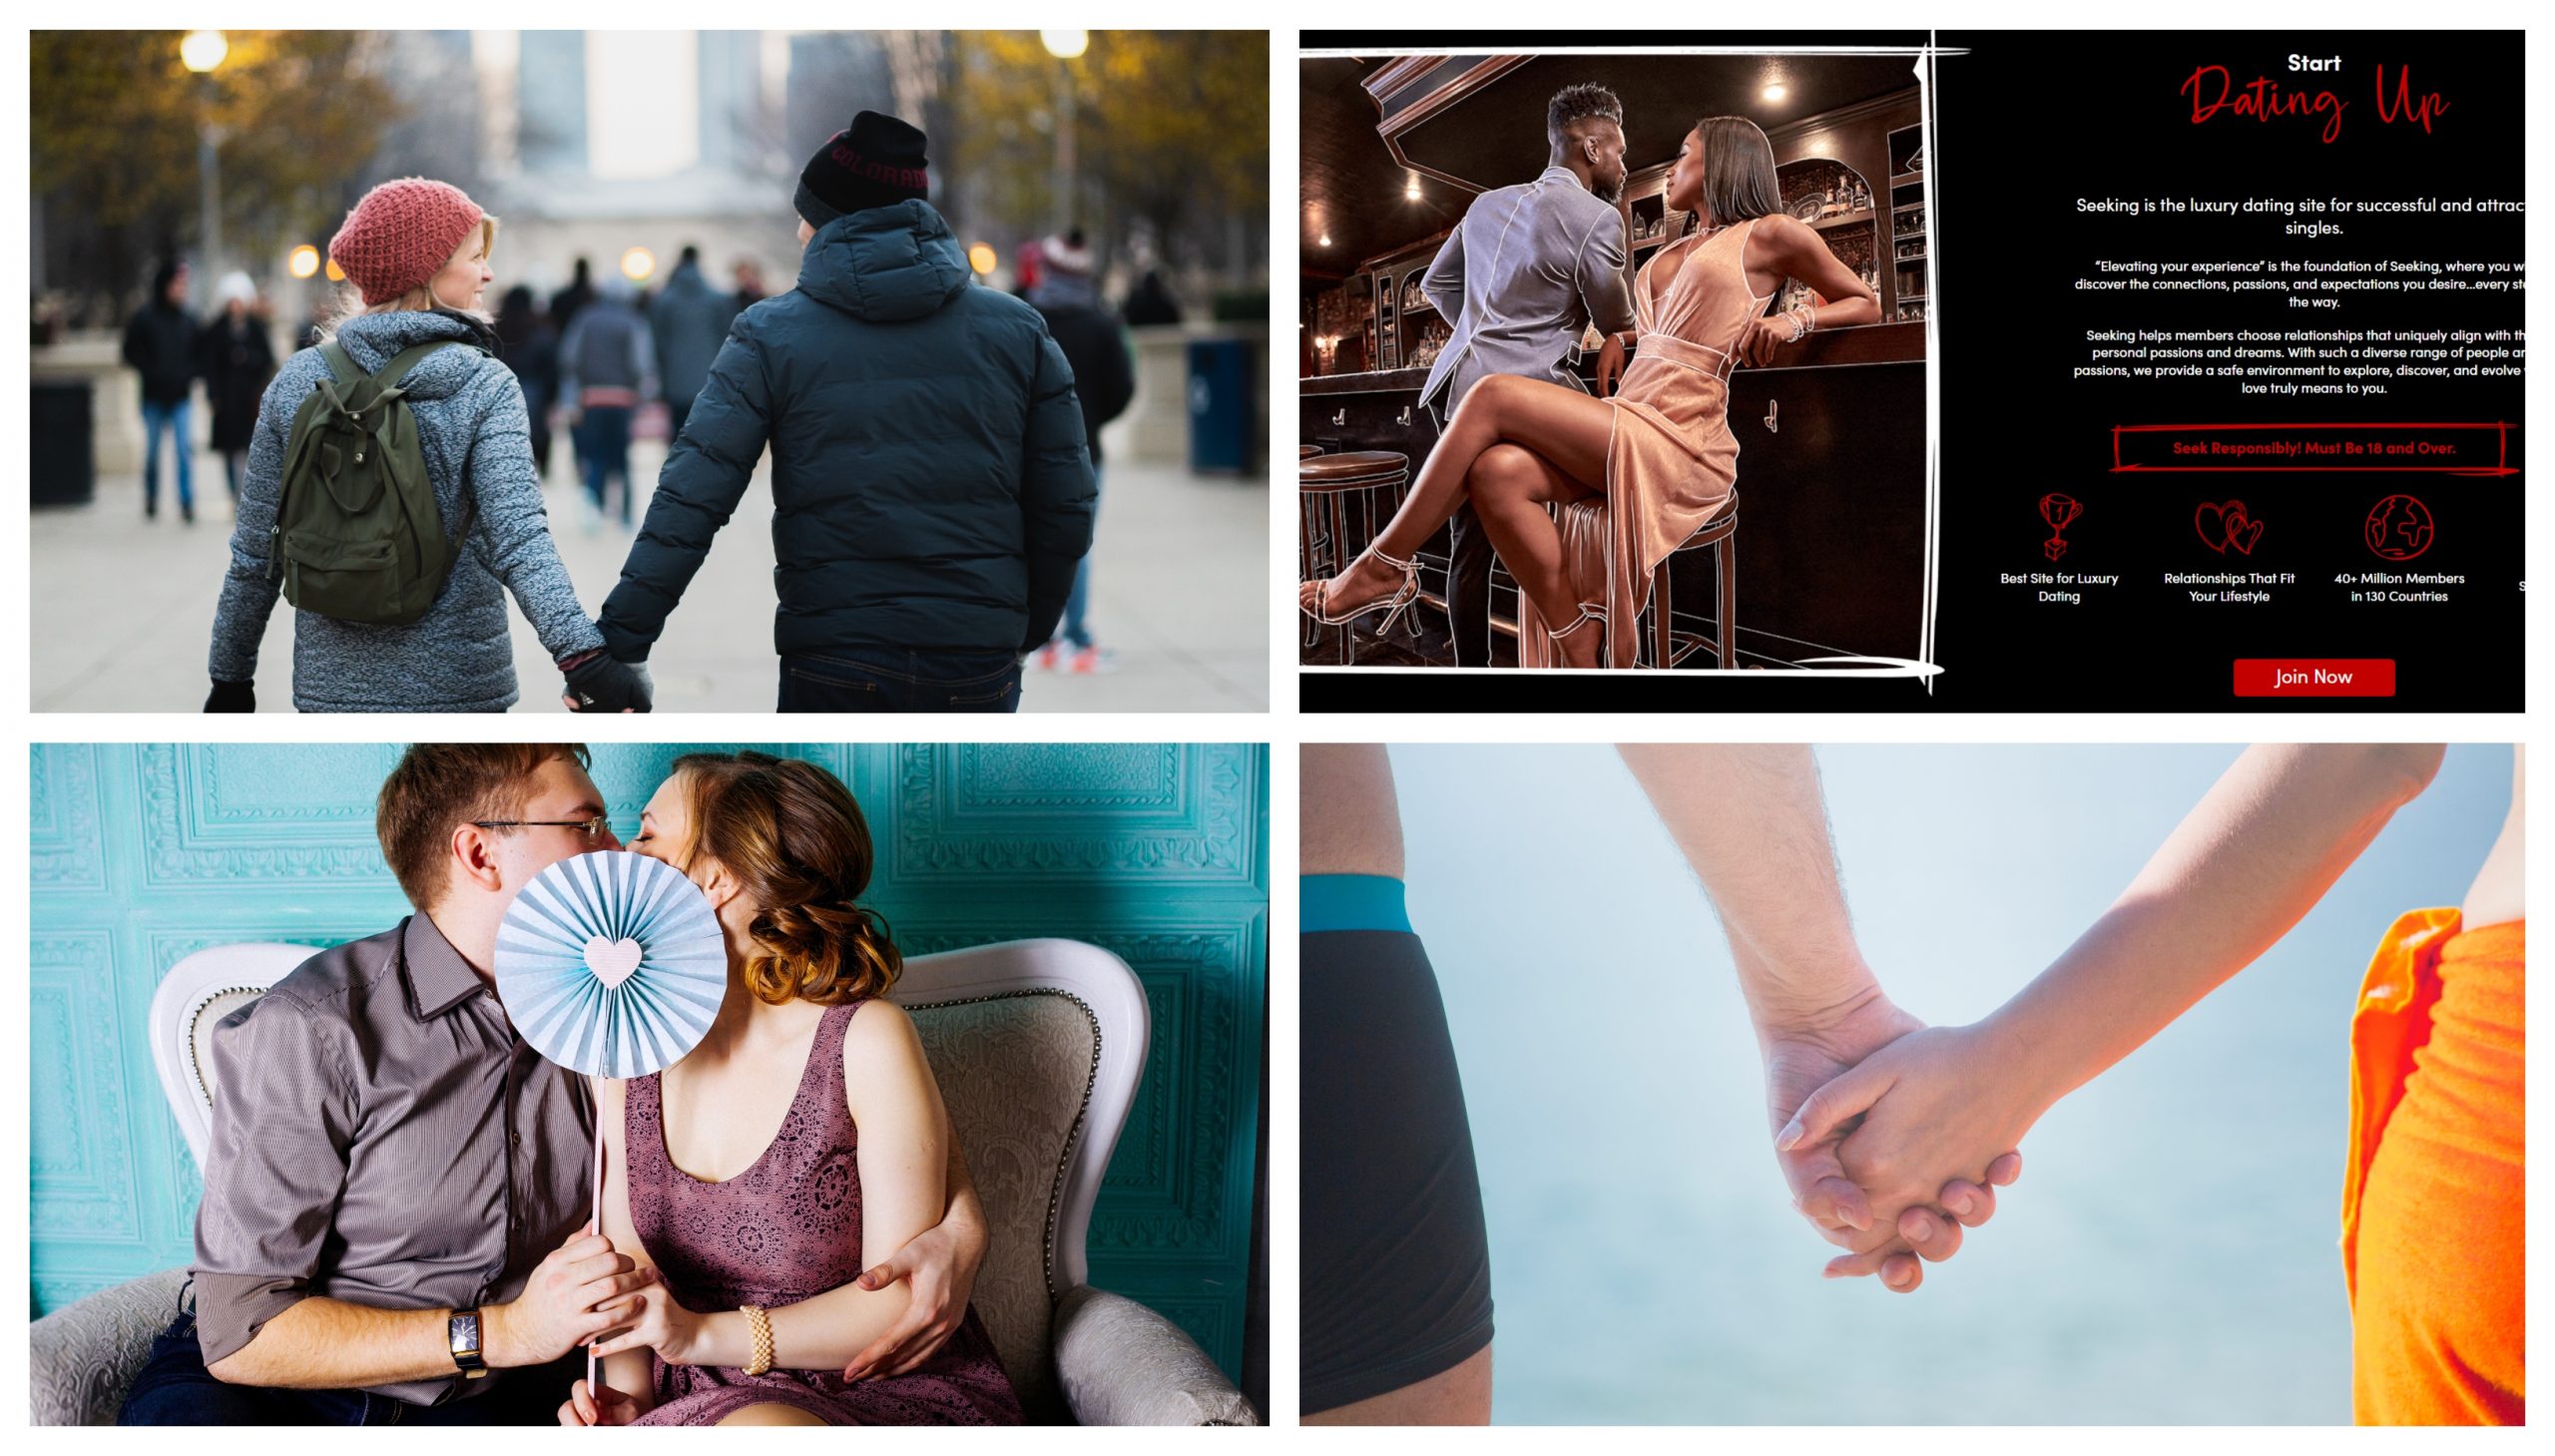 Five Best Dating Sites UK for 2022 - Our top picks for UK Dating apps